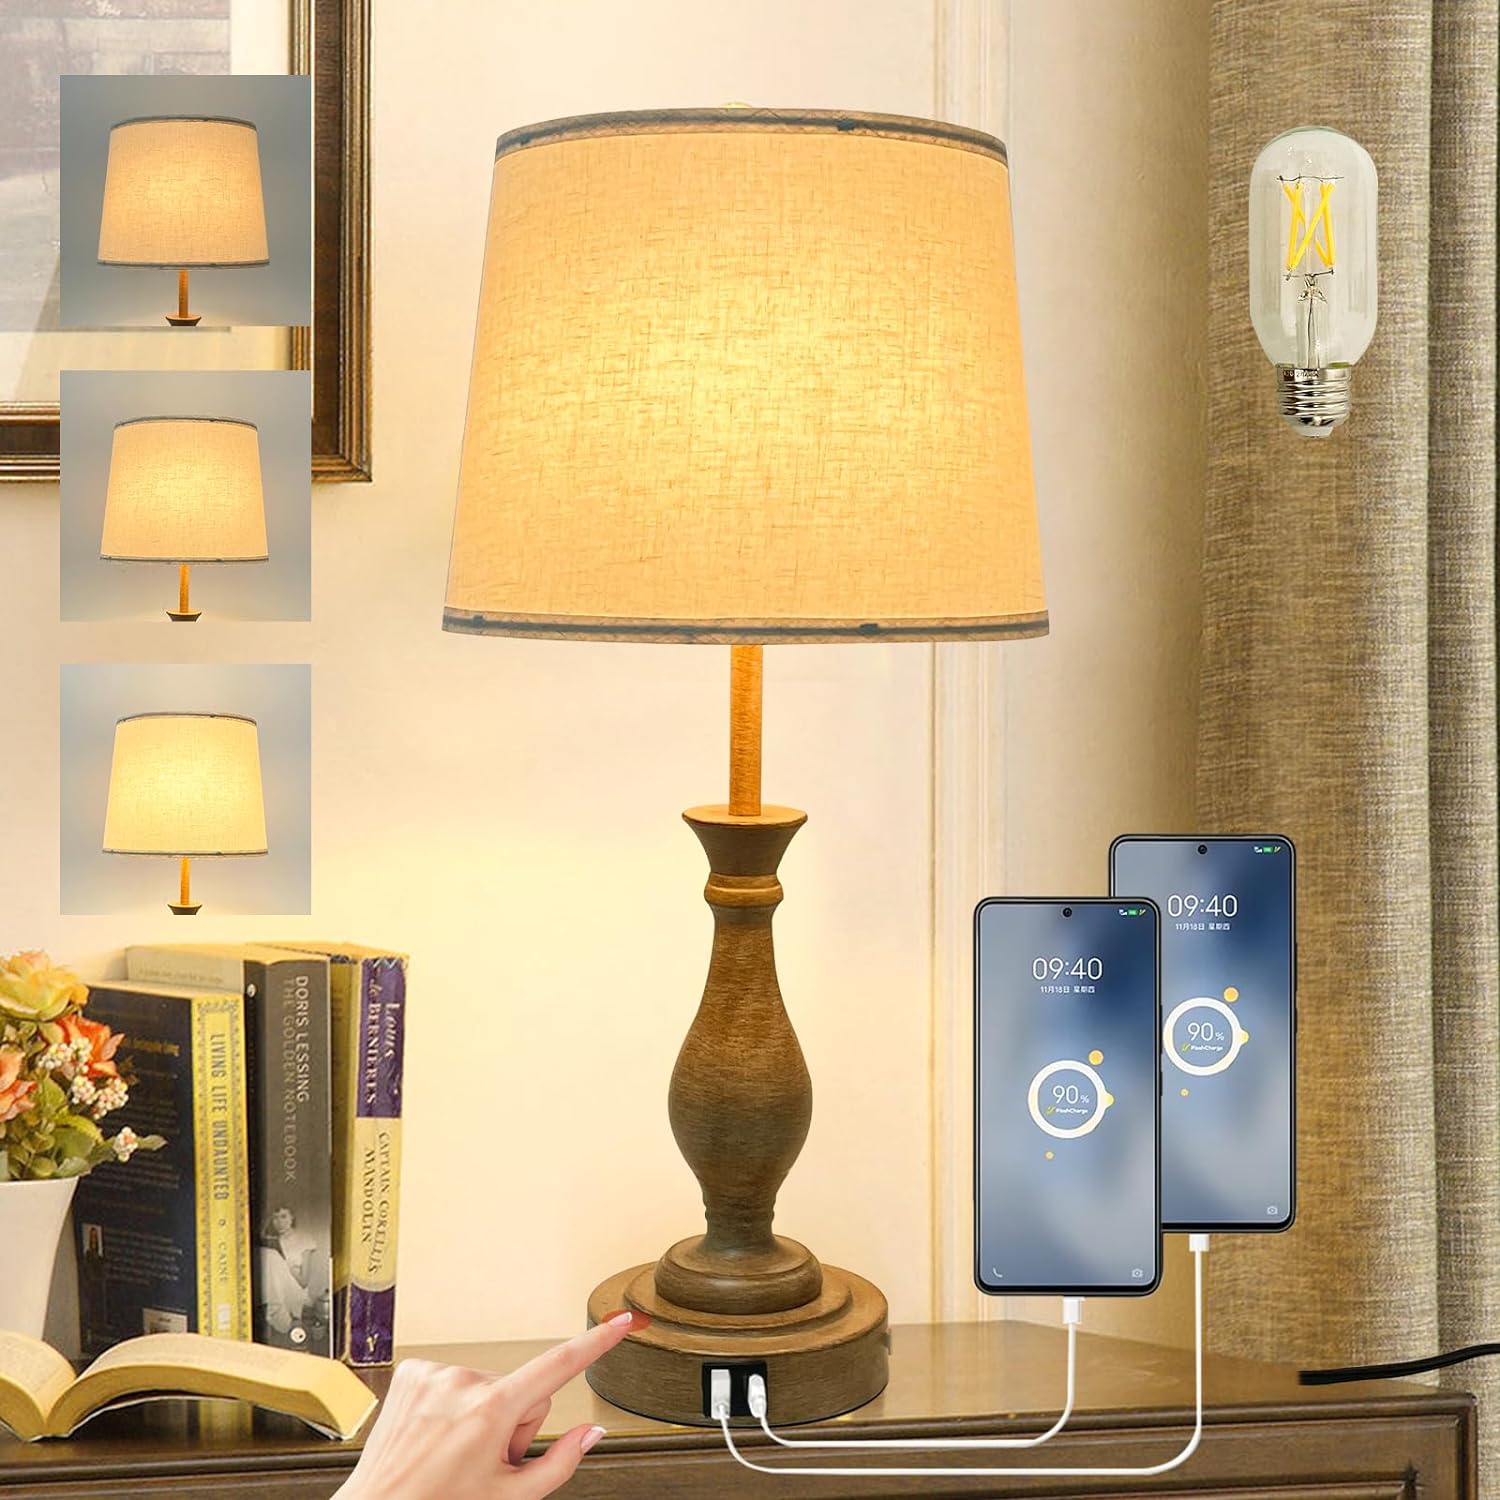 Farmhouse Table Lamp Touch Control 3-Way Dimmable Table Lamp, Modern Nightstand Lamp with 2 USB Port Bedside Desk Lamp with Fabric Shade for Living Room Bedroom Hotel (Pack-01A)